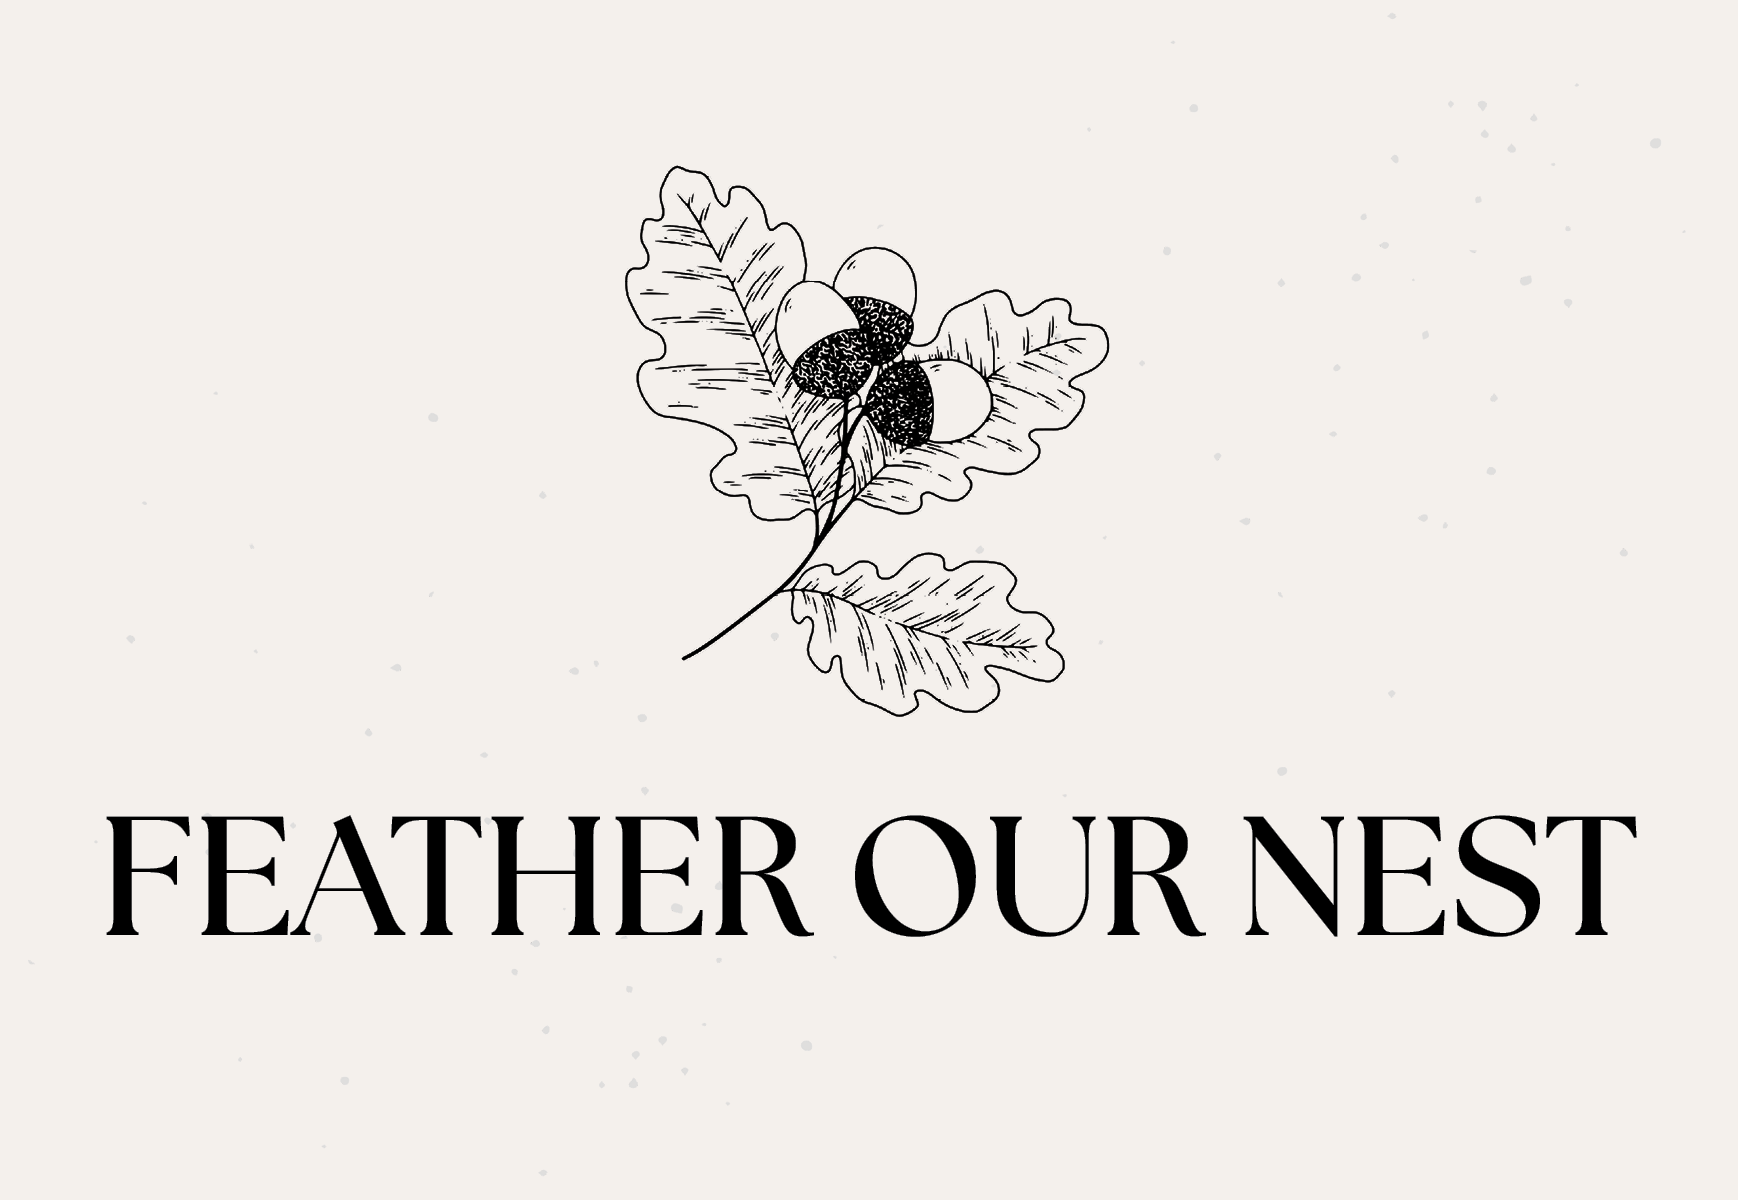 Black and White Sketch of acorns and oak leaves underscored by the words "Feather Our Nest."